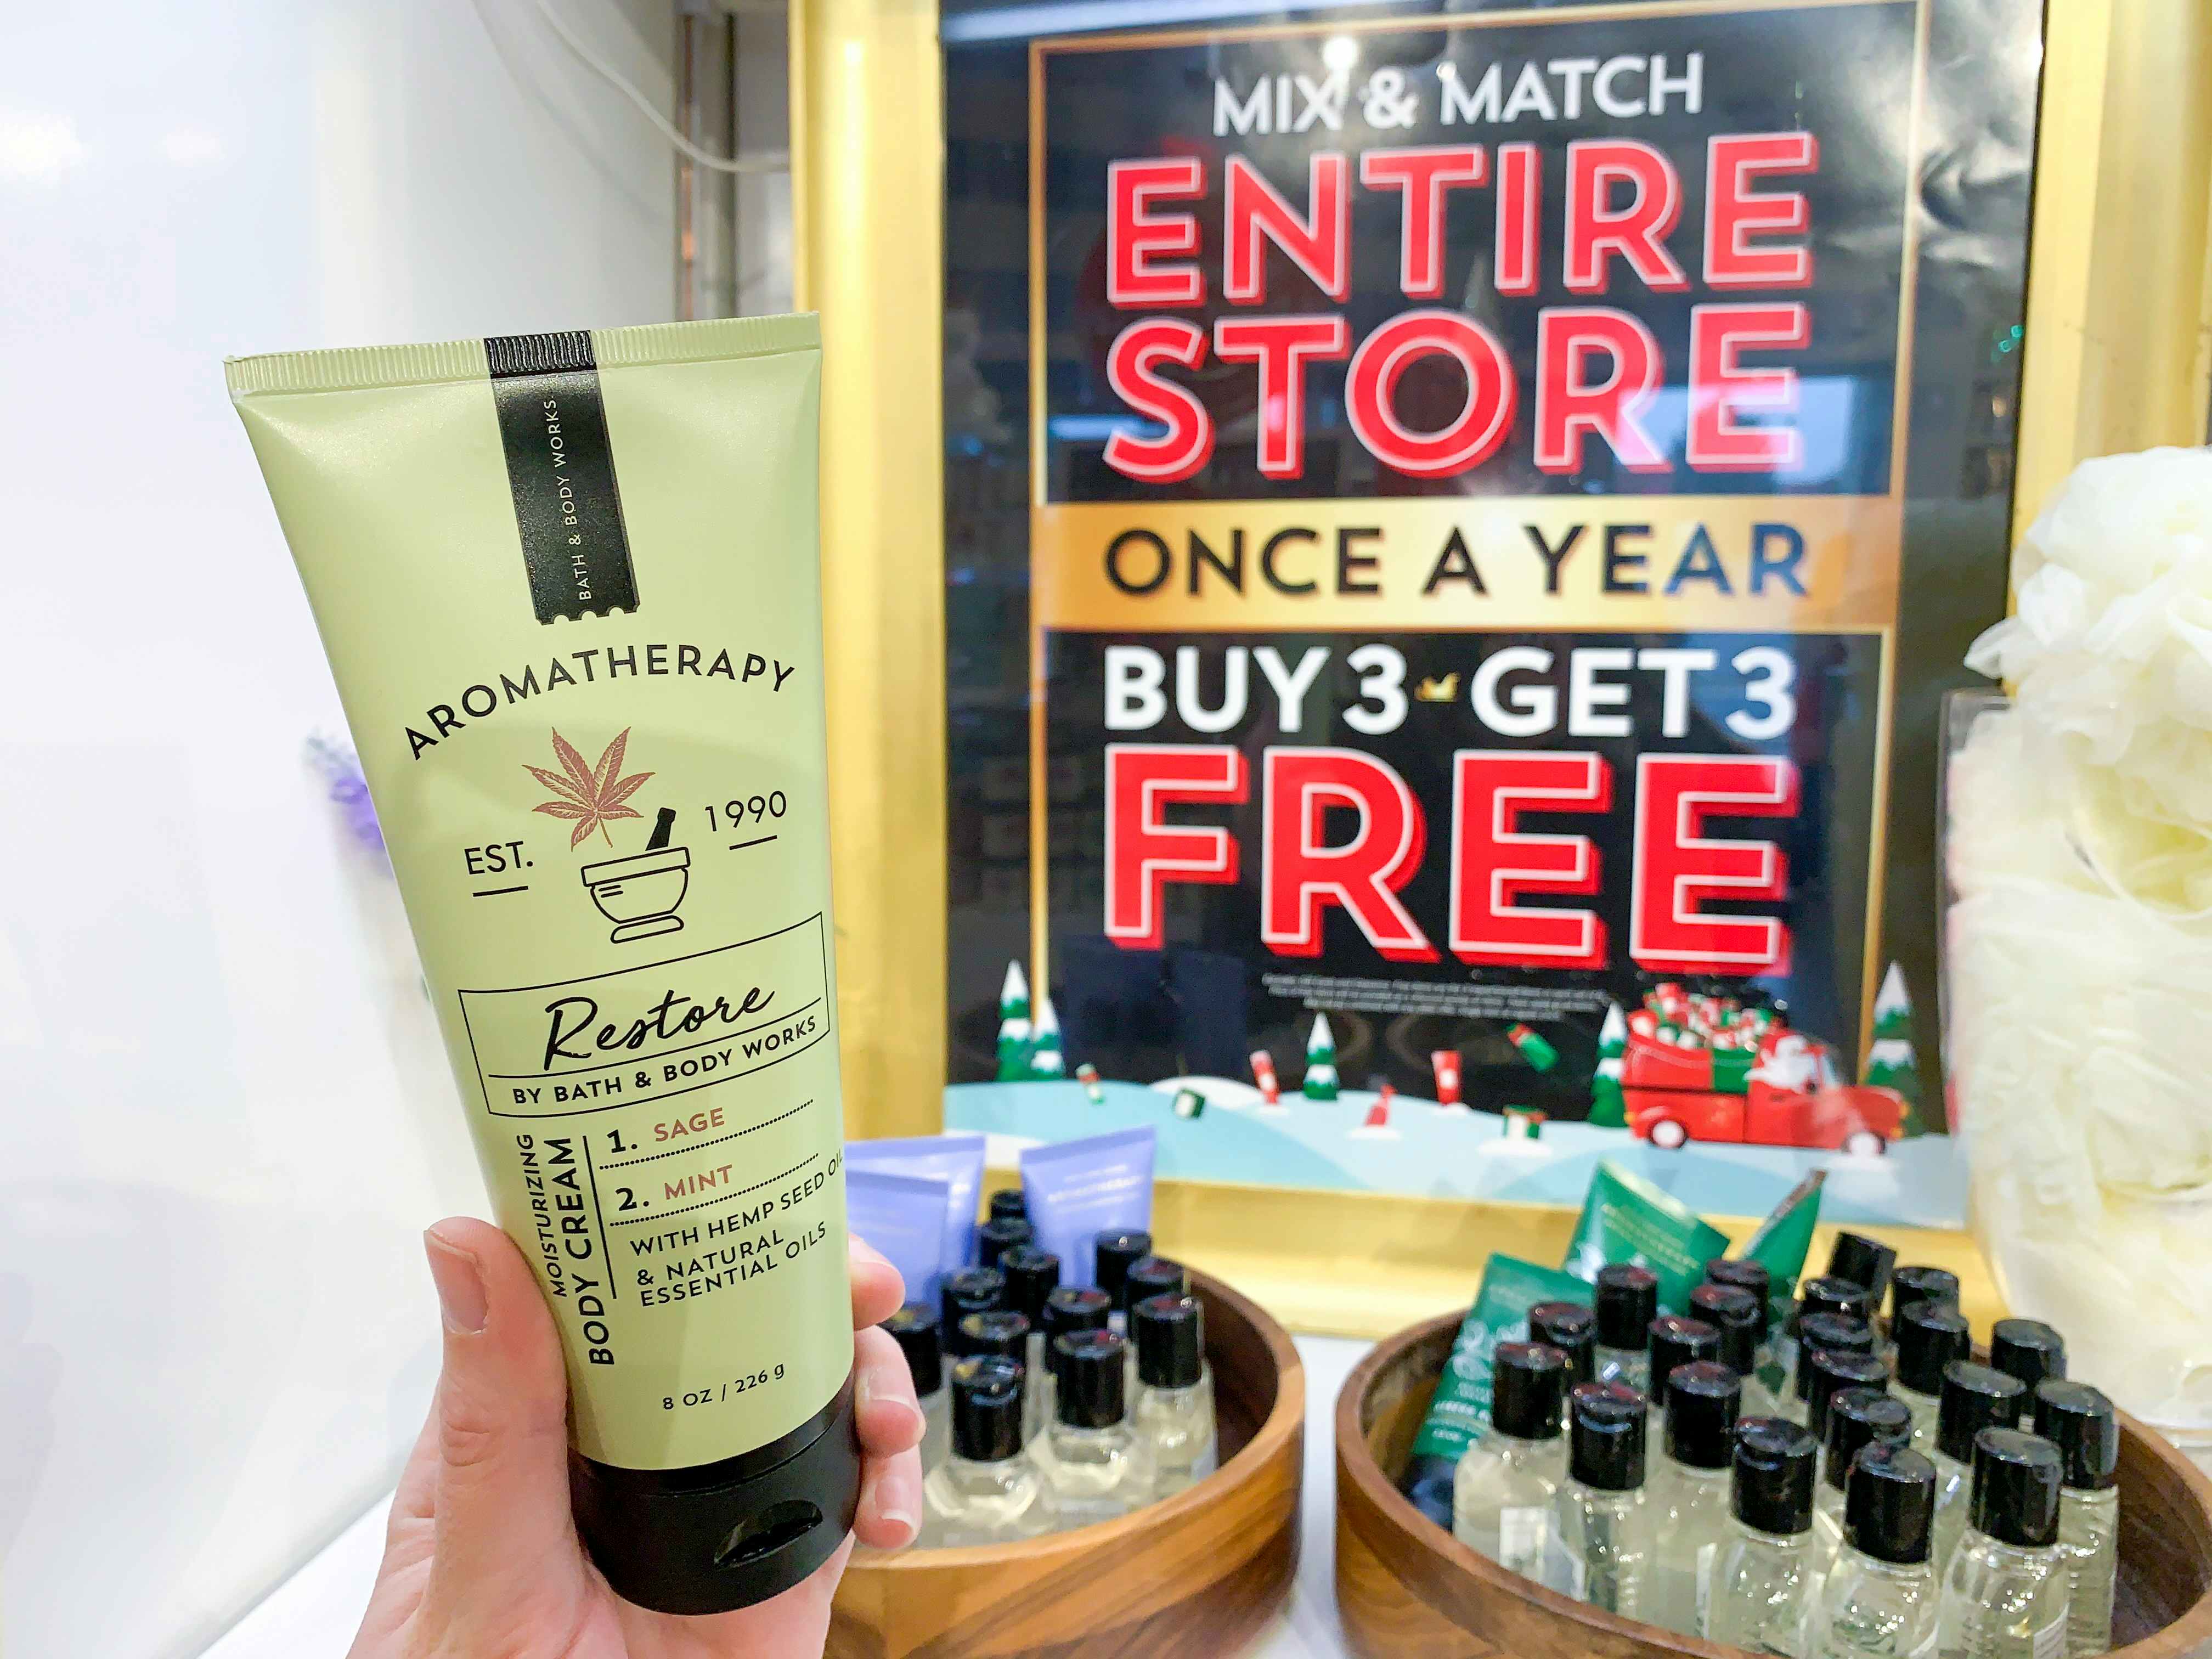 A person's hand holding up a bottle of Aromatherapy lotion in front of a big sign inside Bath & Body Works that reads, "Mix & Match, entire store, once a year, buy 3 get 3 free